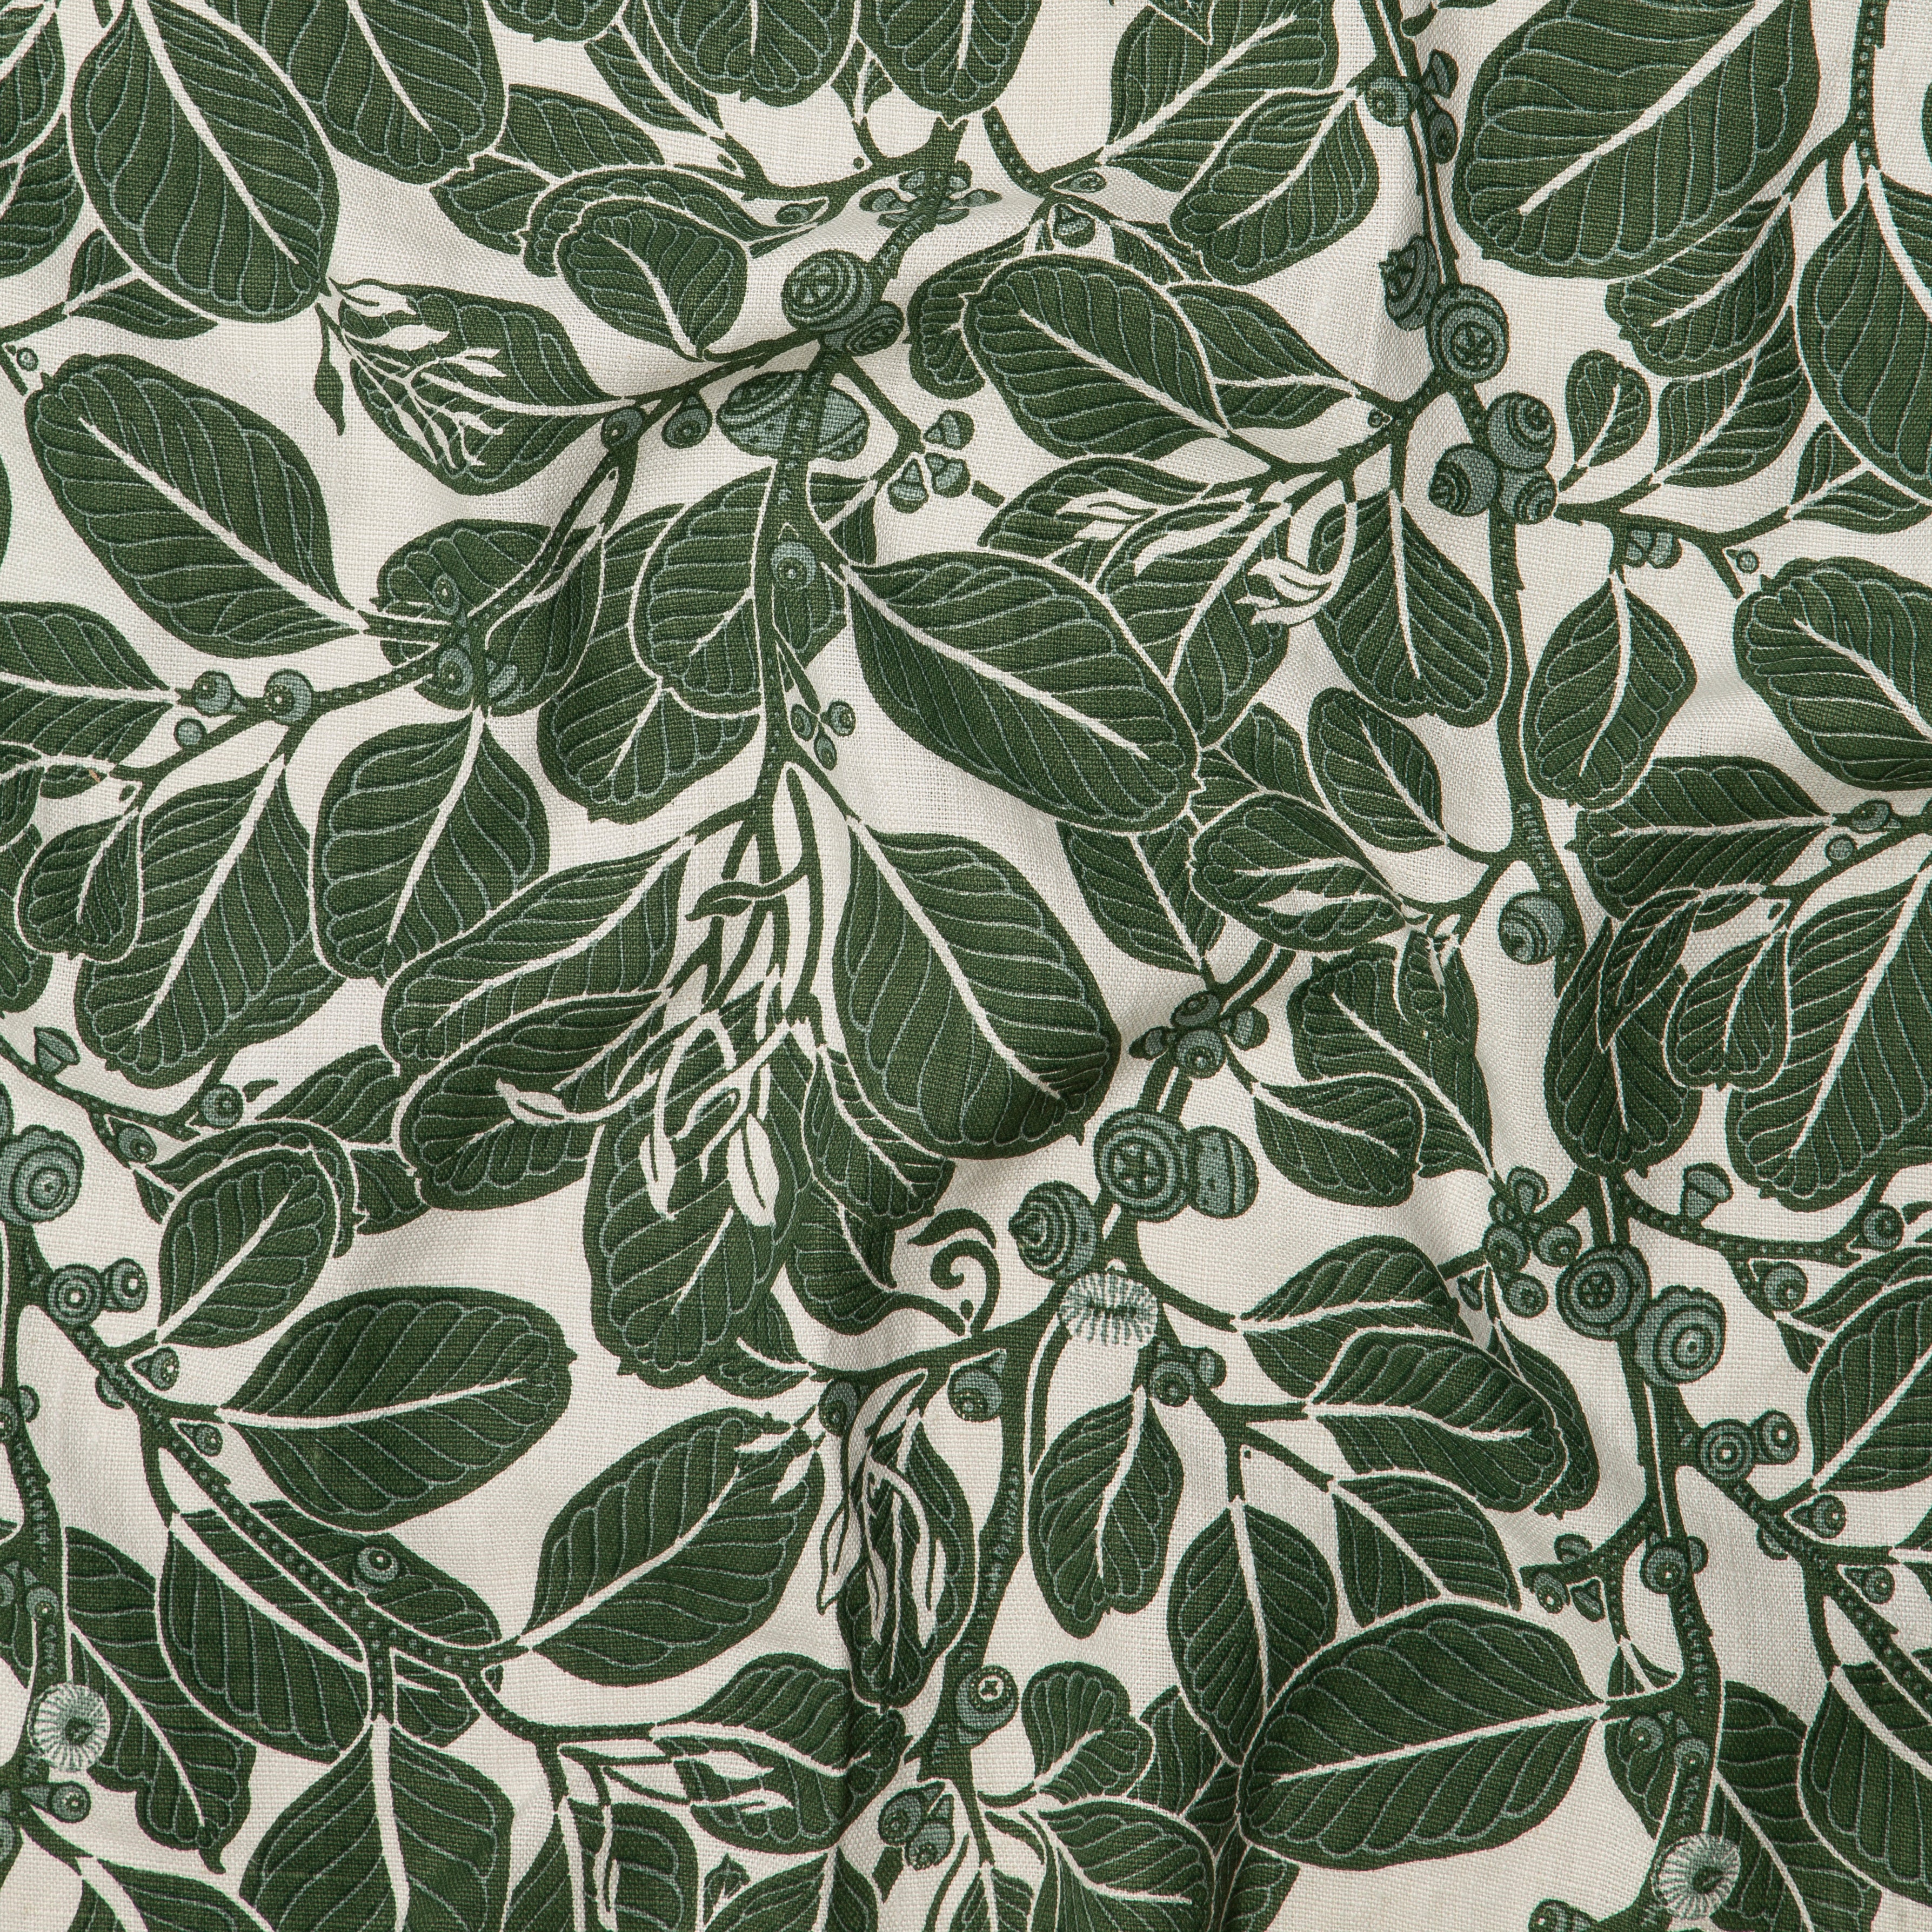 Draped fabric in a dense leaf and stem print in shades of green on a cream field.